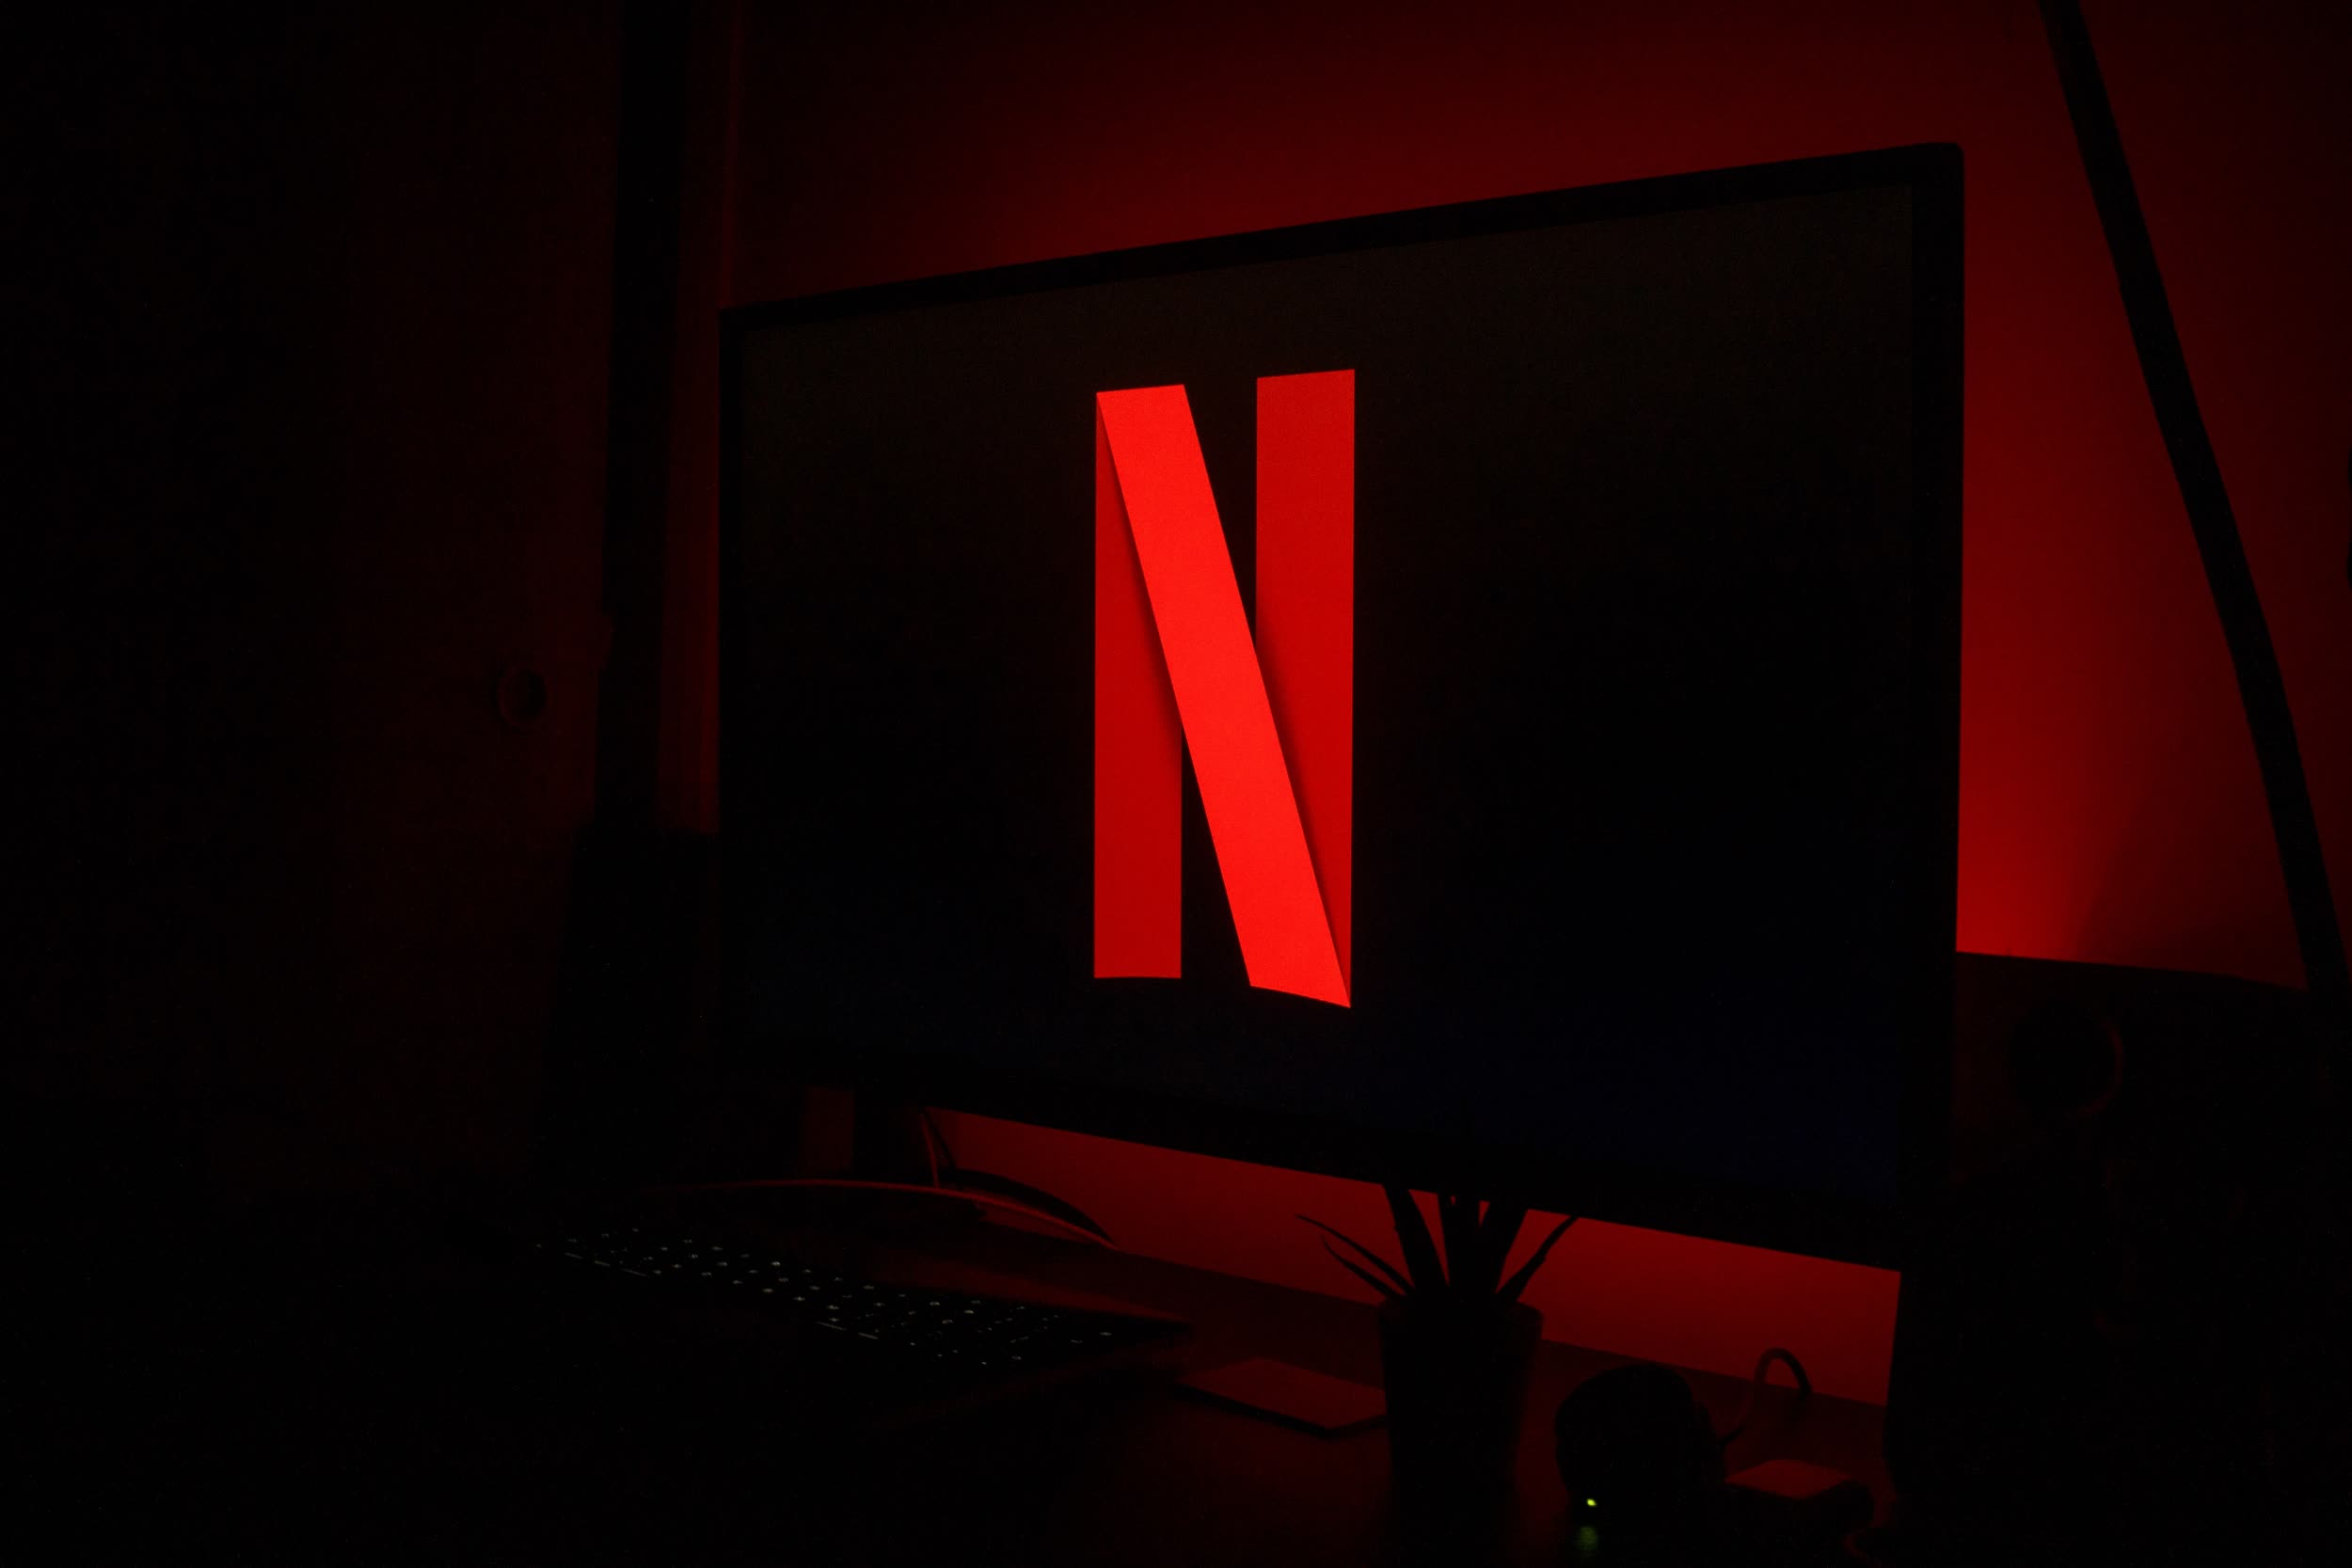 Disgruntled Netflix shareholders sue over subscription disclosures